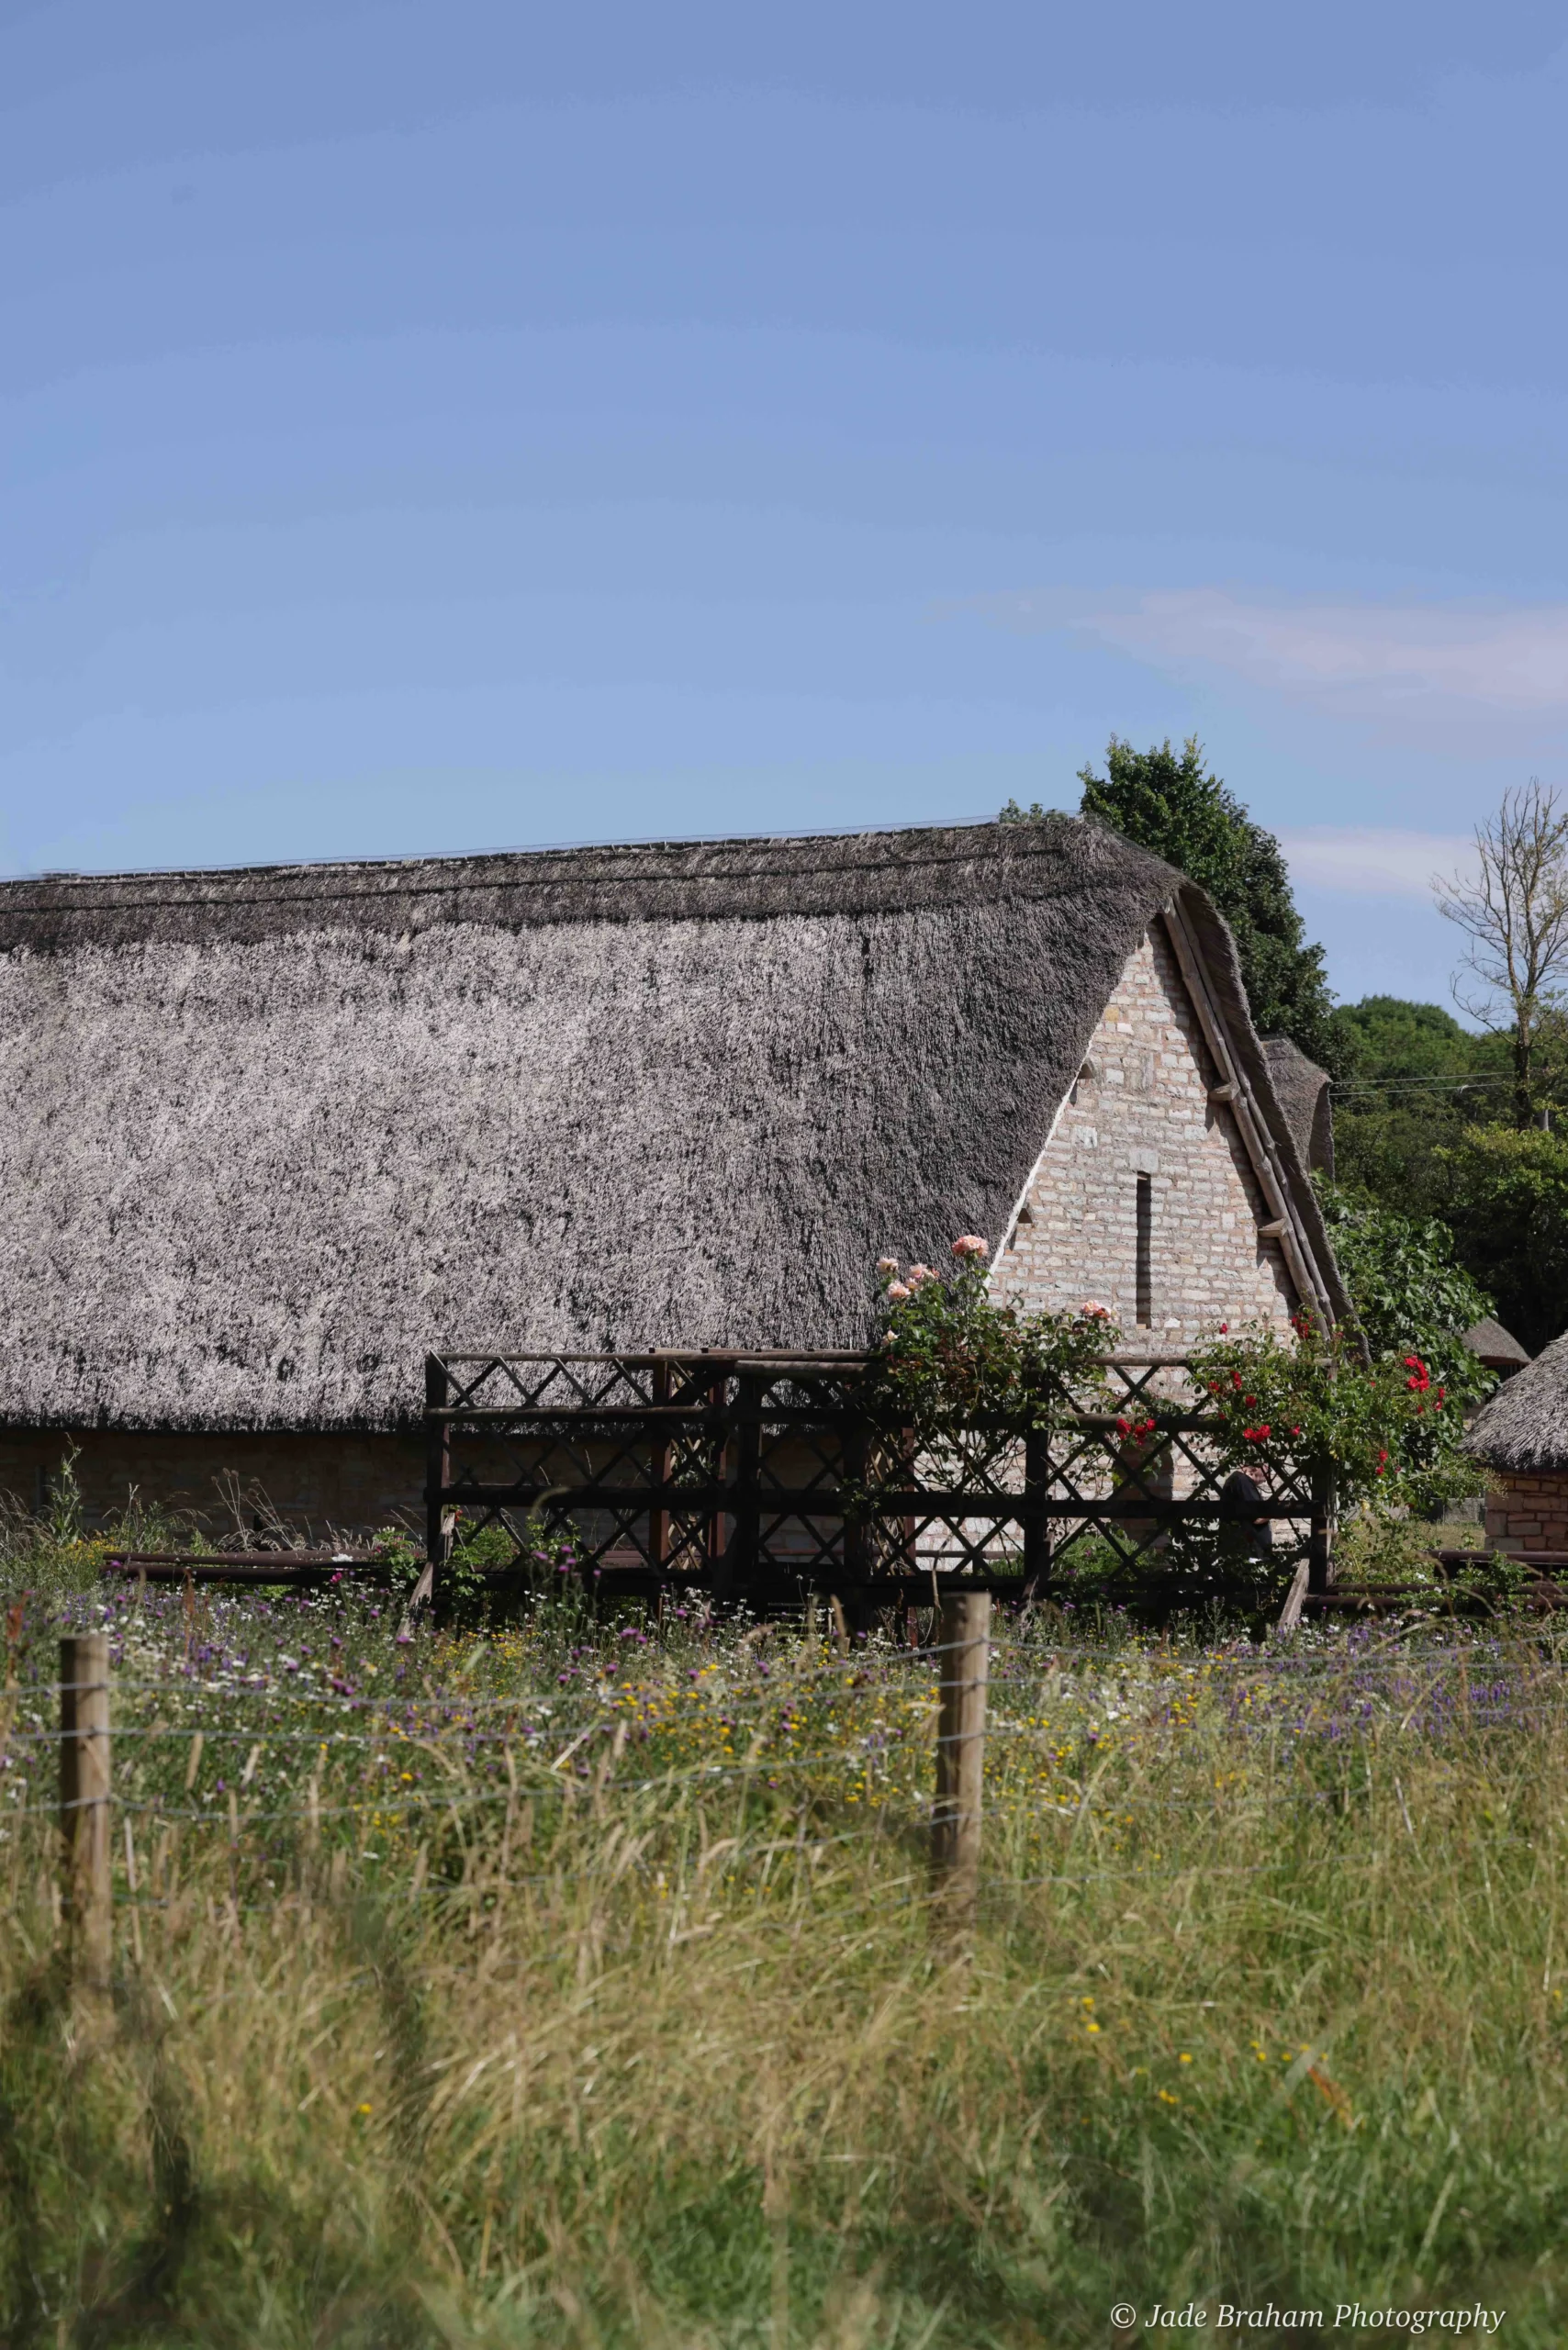 A medieval, thatched-roof hut sits in a field in the Vale of Glamorgan.